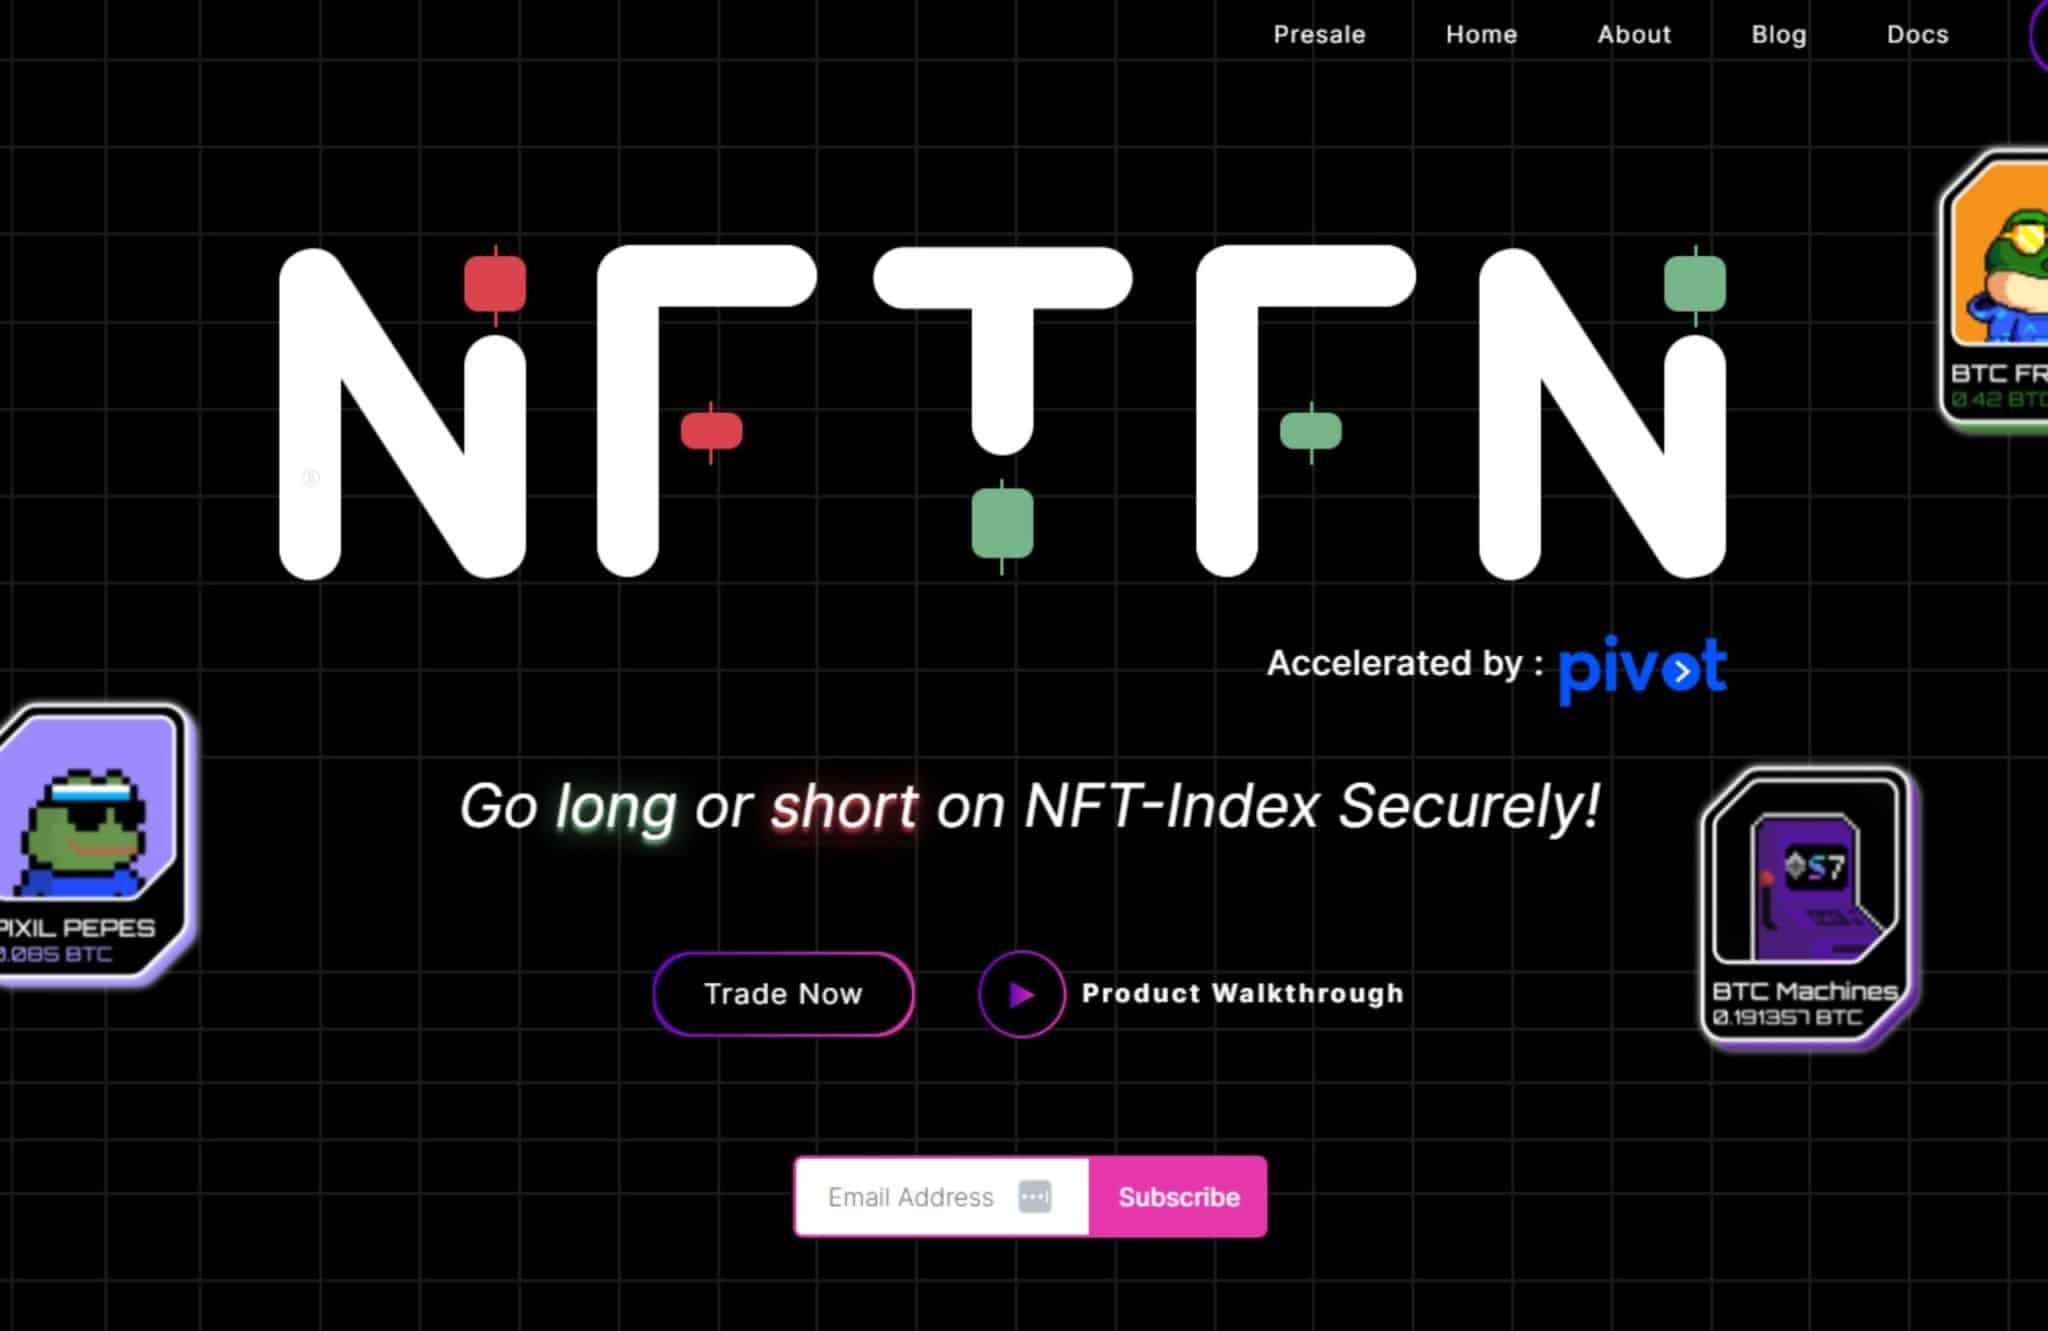 Don't miss out on the NFTFN presale! Grab your bag of NFTFN NFT now and join the revolution in the NFT market - Here's How.